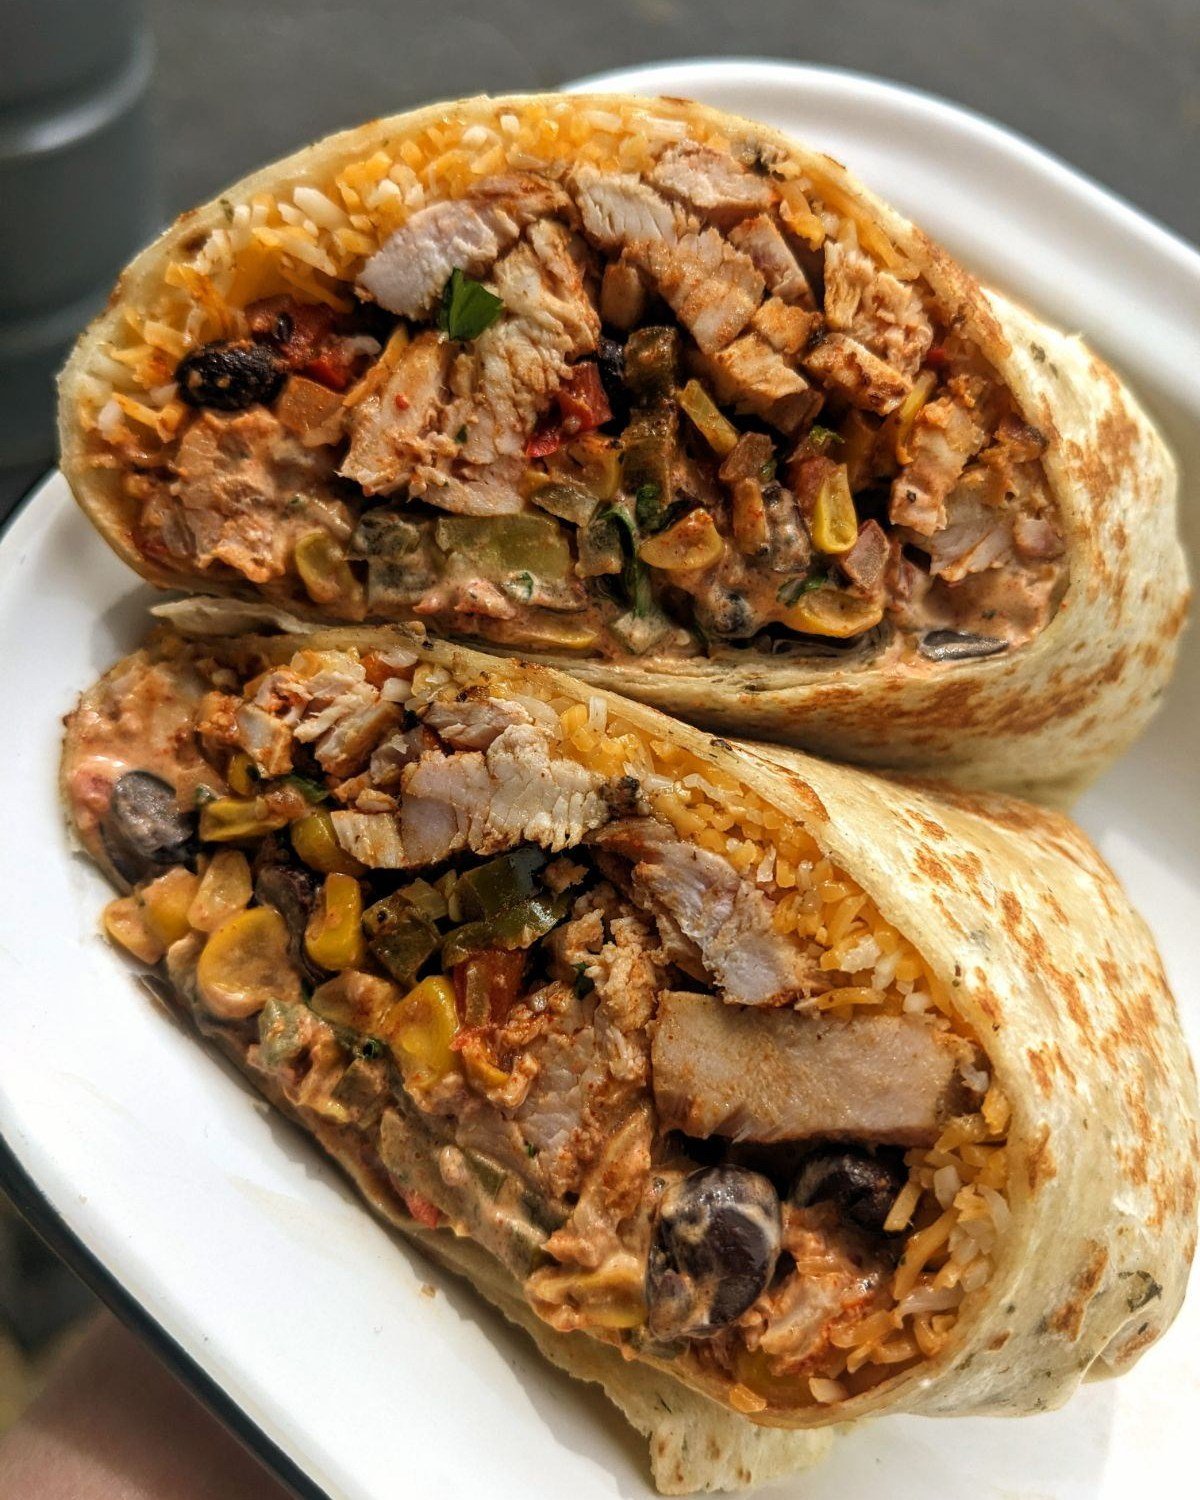 MONDAY (5/13)- SMOKEHOUSE SPECIAL
ALL DAY- - - Shredded smoked chicken burrito, cheddar jack, chipotle crema, lettuce, black bean and corn salsa, pickled jalapeno.

#smokemeateveryday #weeklyspecials #AlamanceNC #SmokeEverything #southernfoodie